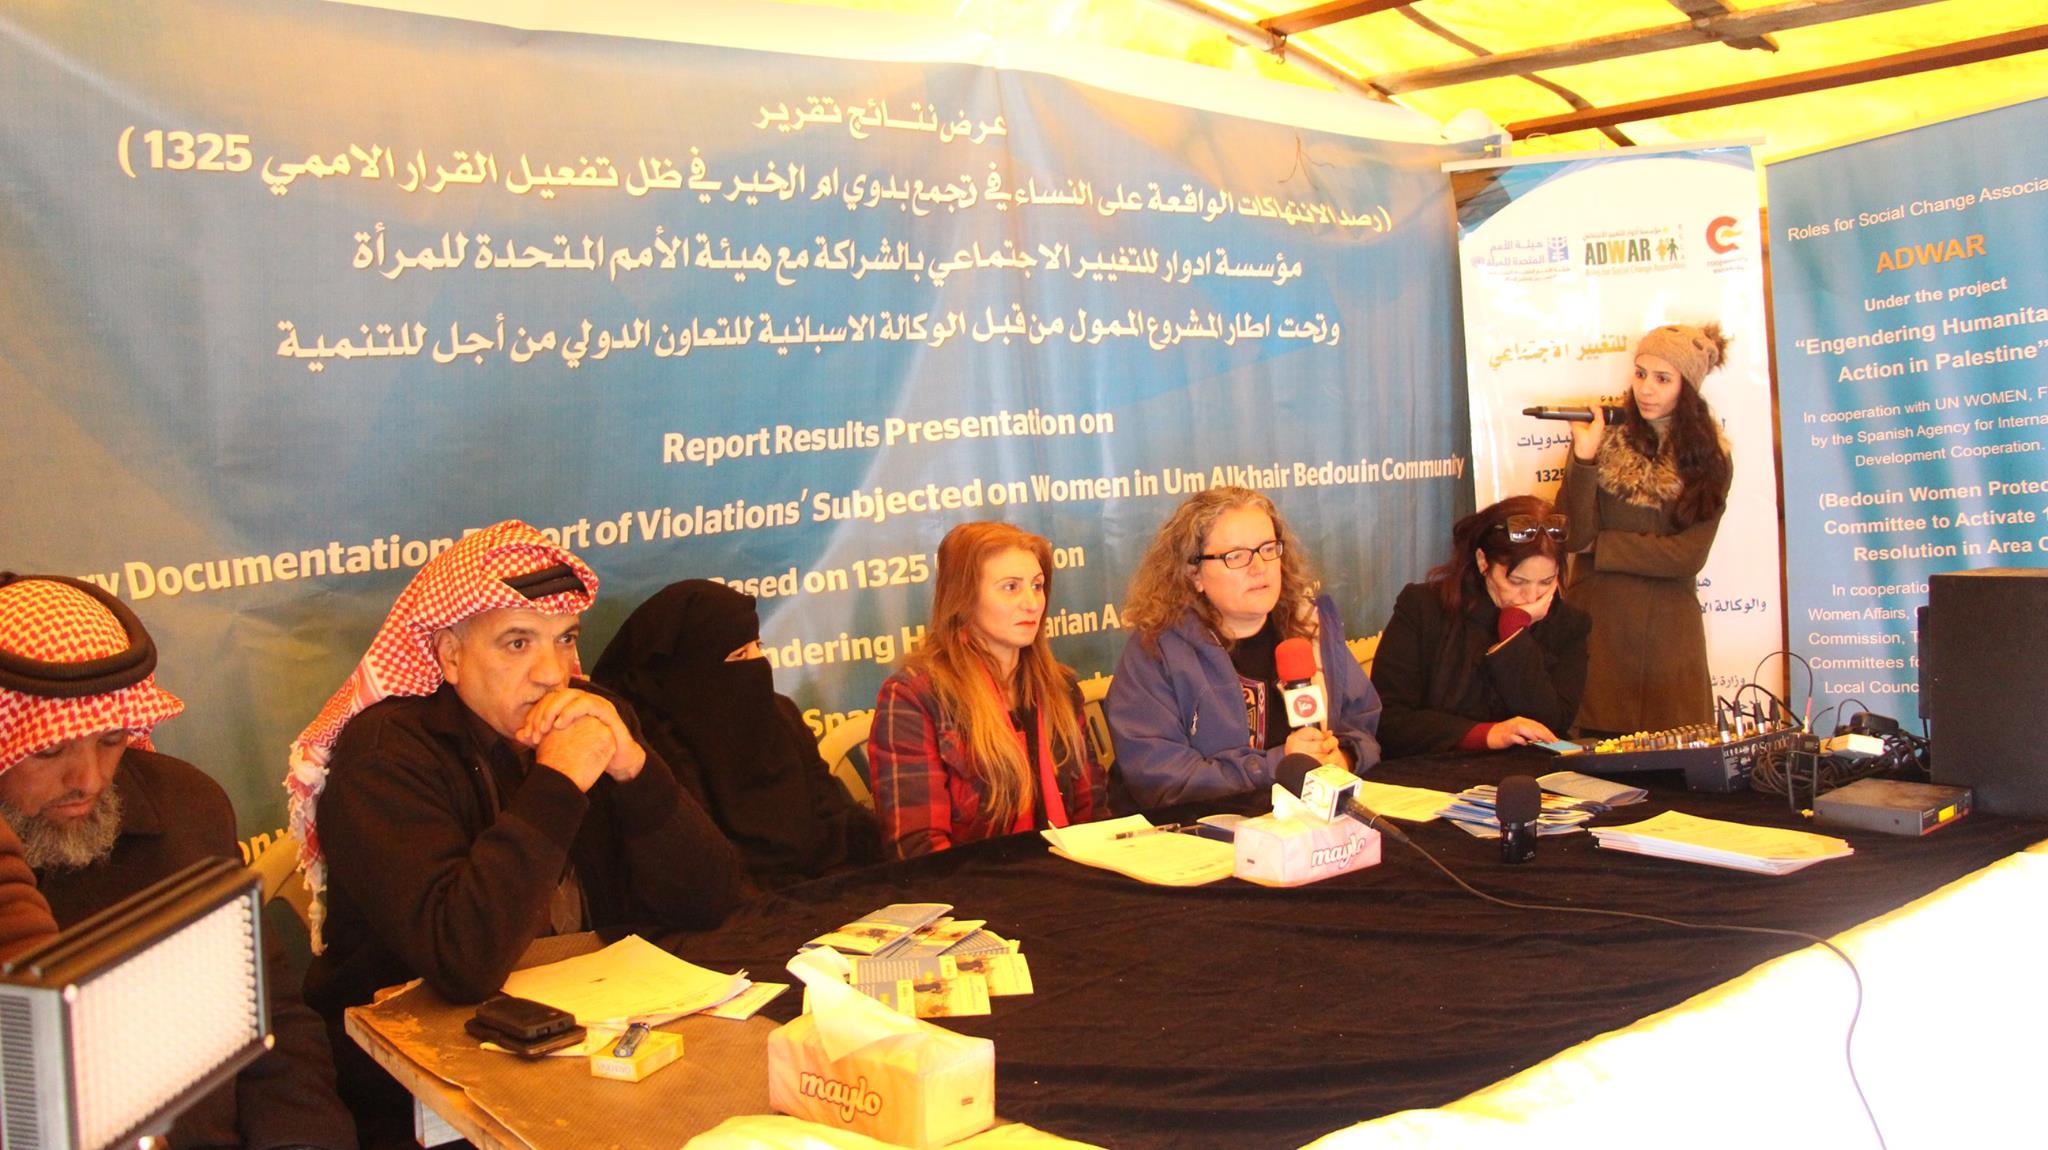  Roles for Social Change Association (ADWAR), on Wednesday organized a media conference as part of the project to protect Bedouin Women and revive the UN resolution 1325 in C areas of the West Bank